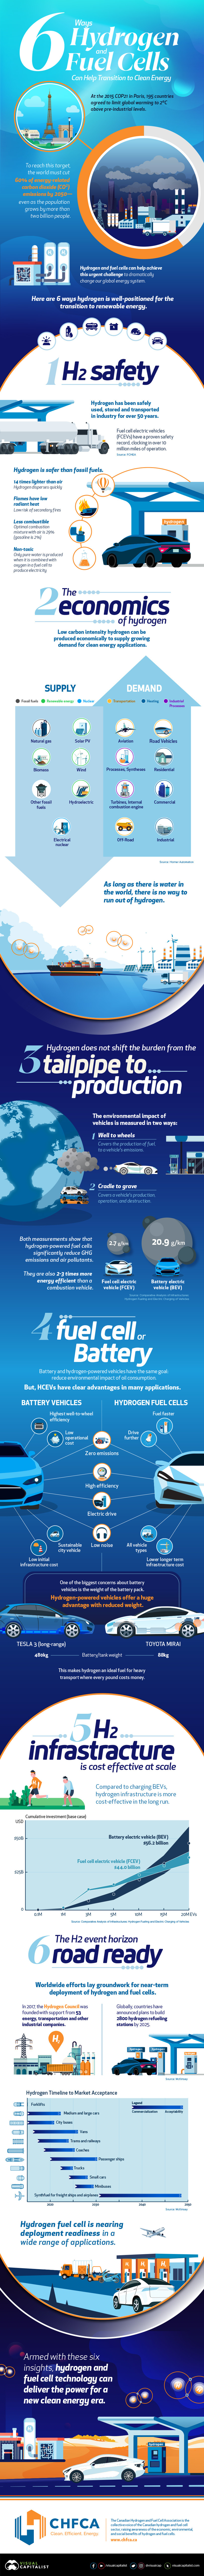 6 Ways Hydrogen and Fuel Cells Can Help Transition to Clean Energy